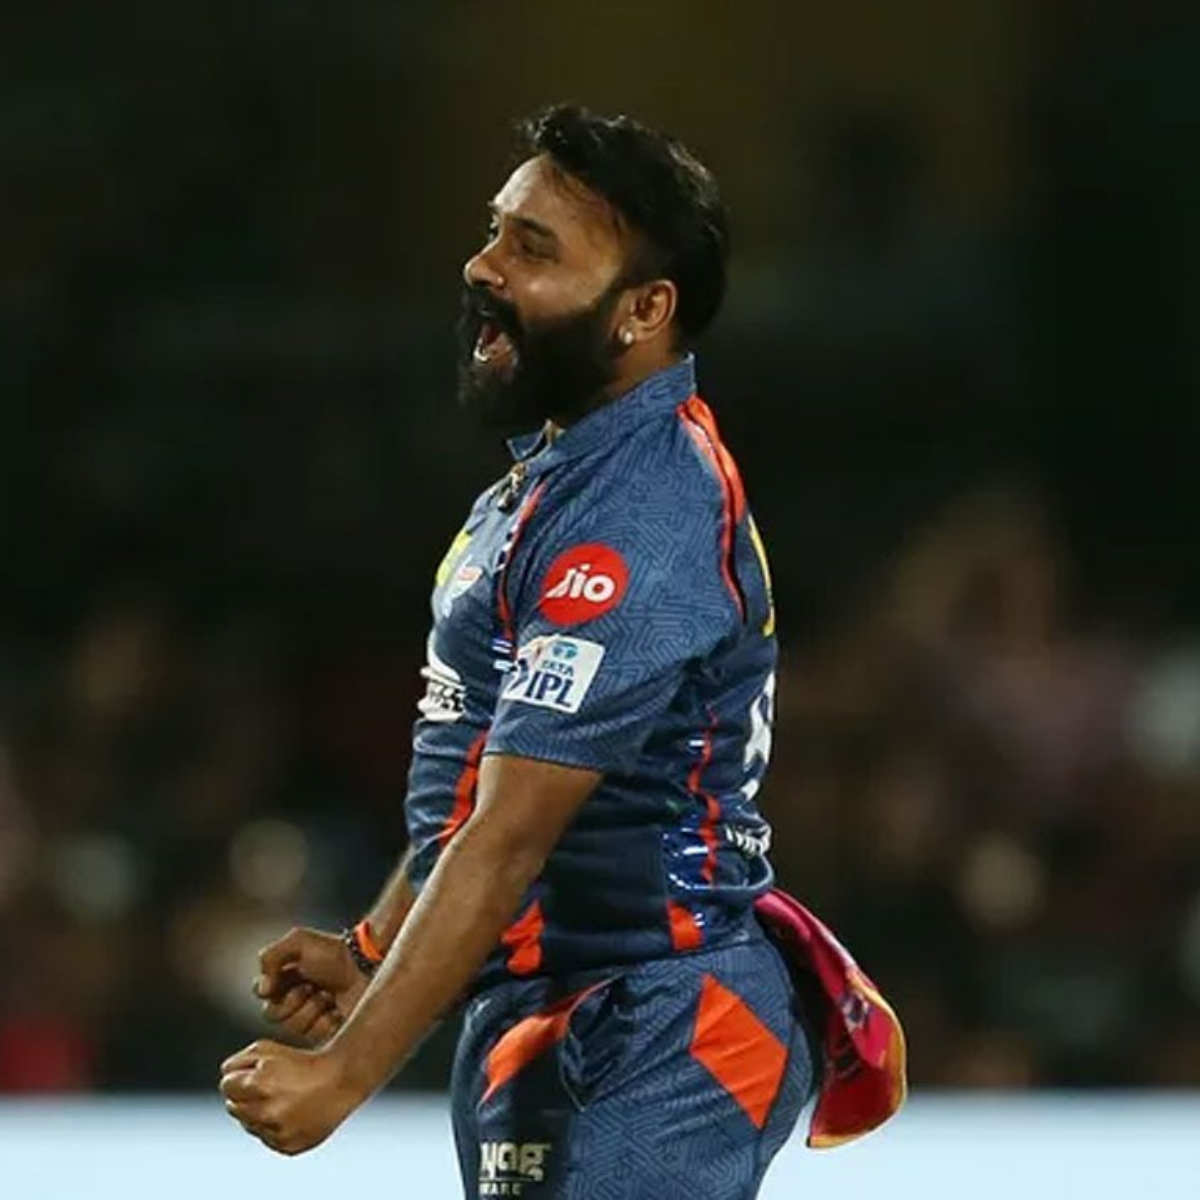 LSG vs RCB: Amit Mishra becomes third highest wicket taker in IPL history, surpasses Lasith Malinga's tally of 170 wickets